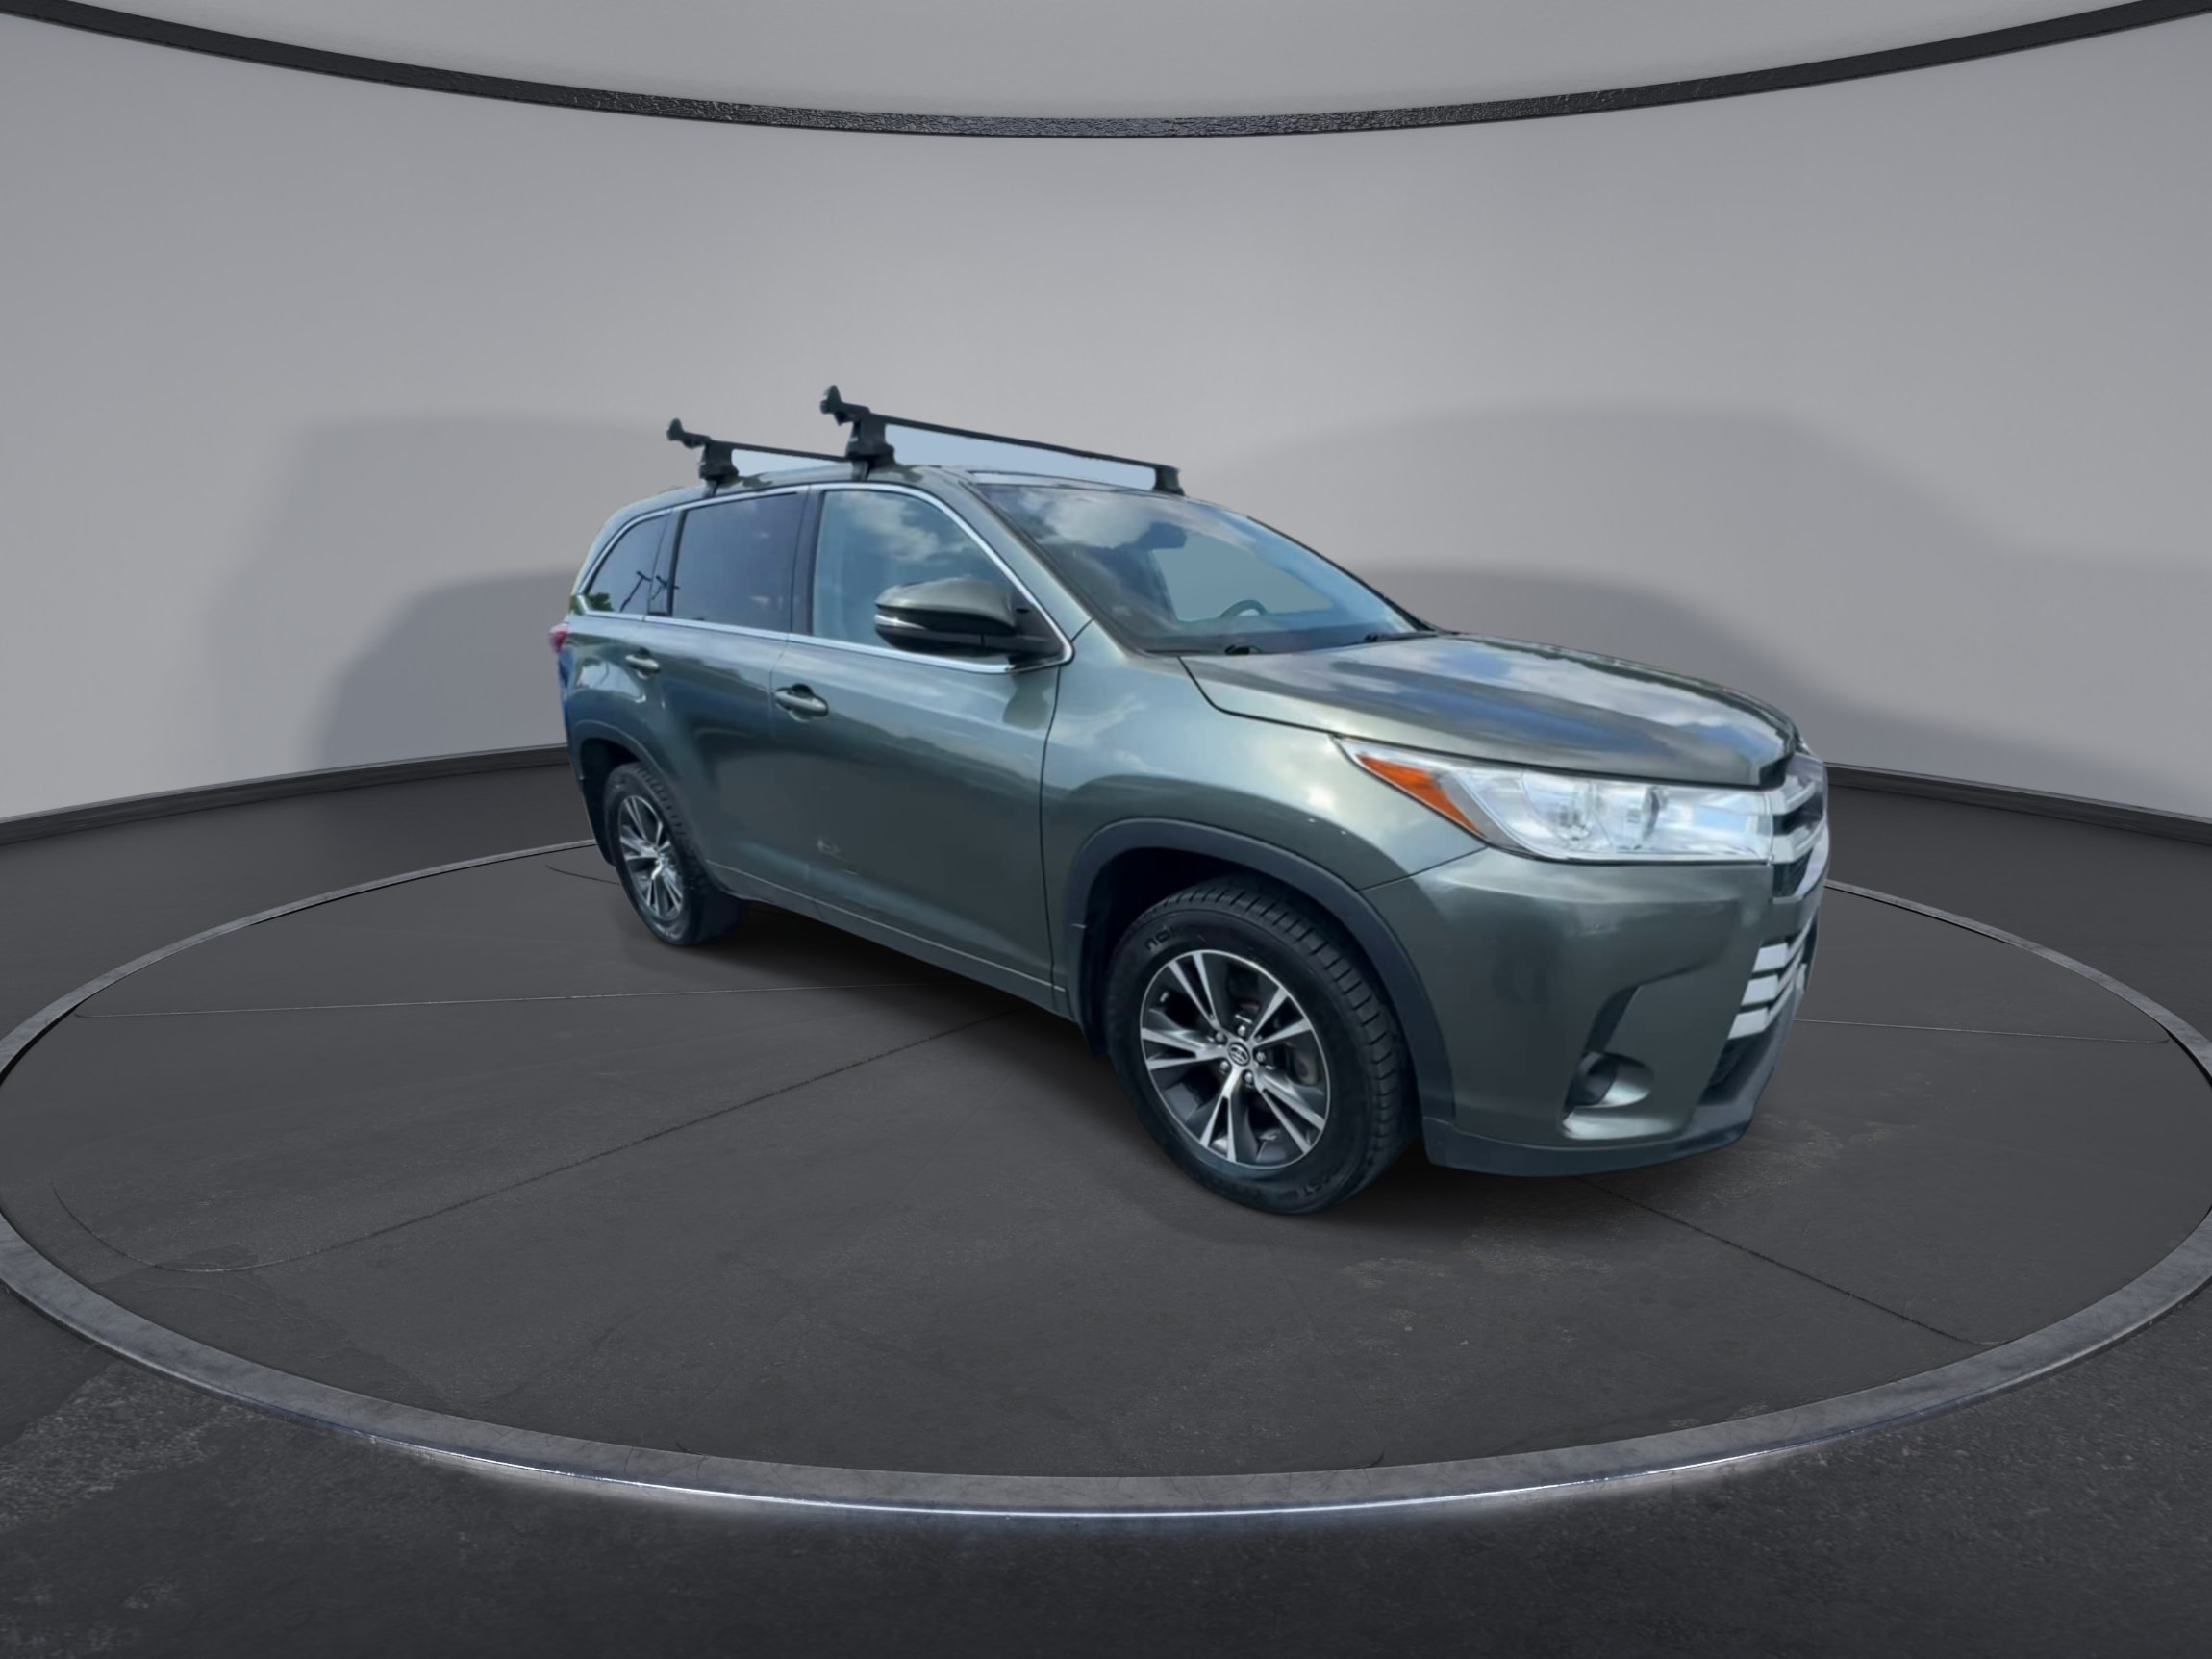 Used 2018 Toyota Highlander LE with VIN 5TDBZRFH1JS911310 for sale in Berlin, VT